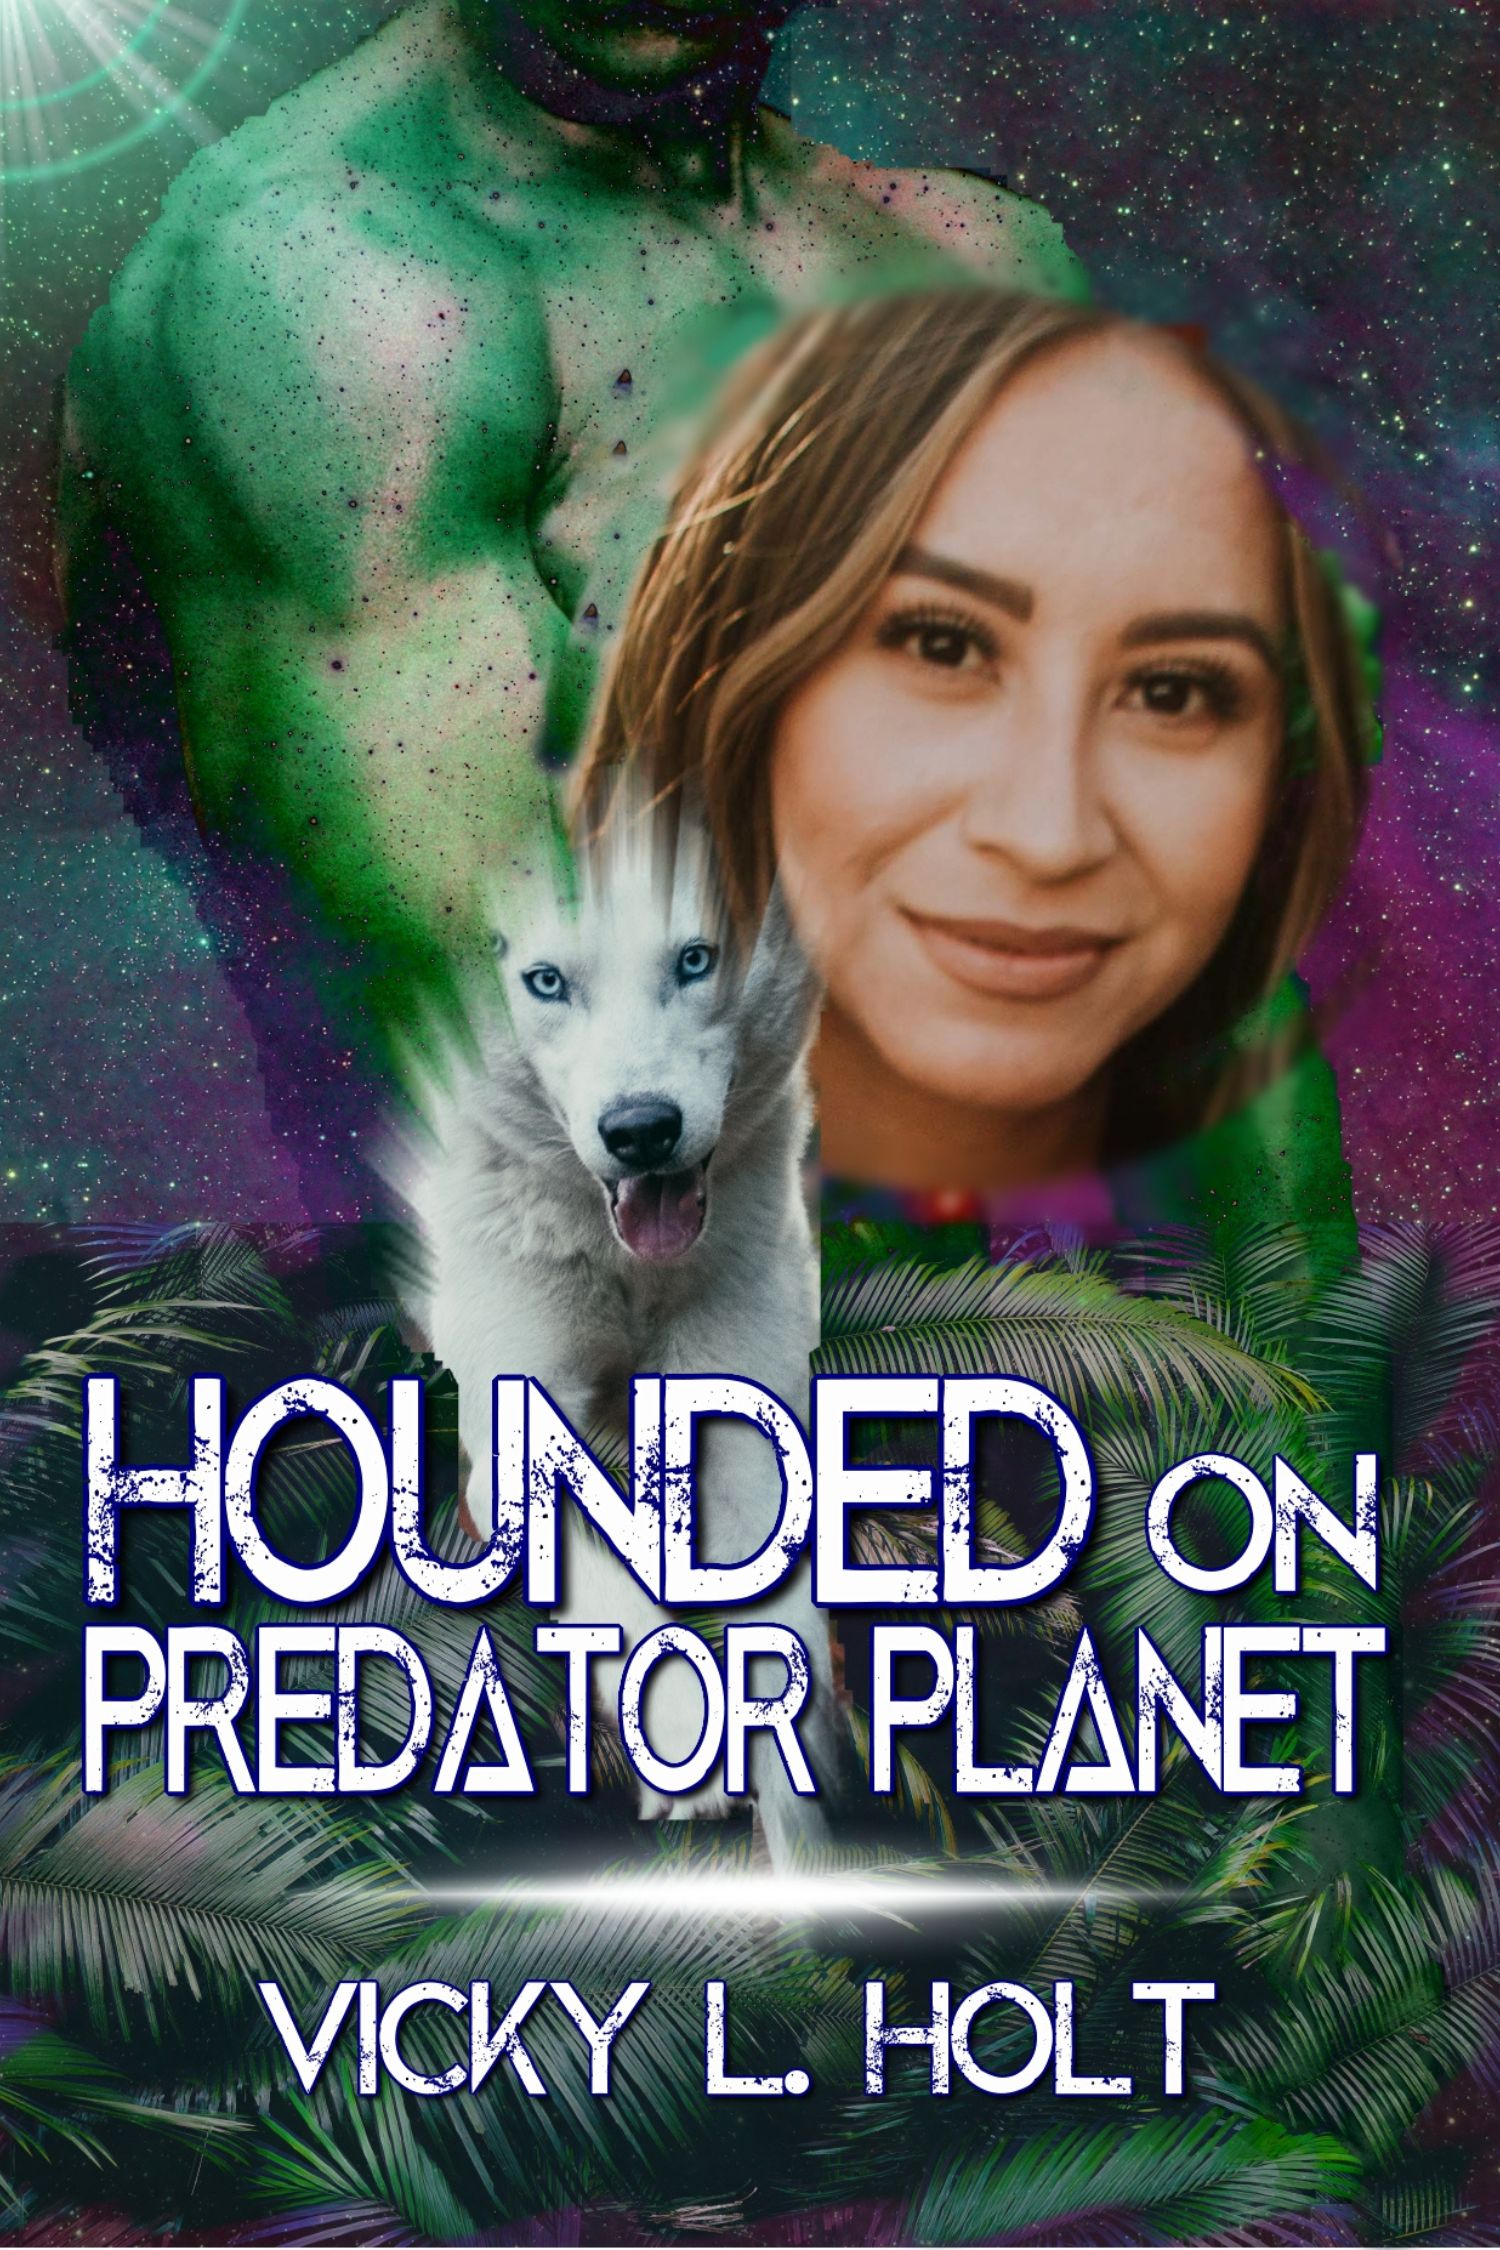 The cover of the book, Hounded on Predator Planet, features a running white wolf and a smiling hispanic/LatinX woman